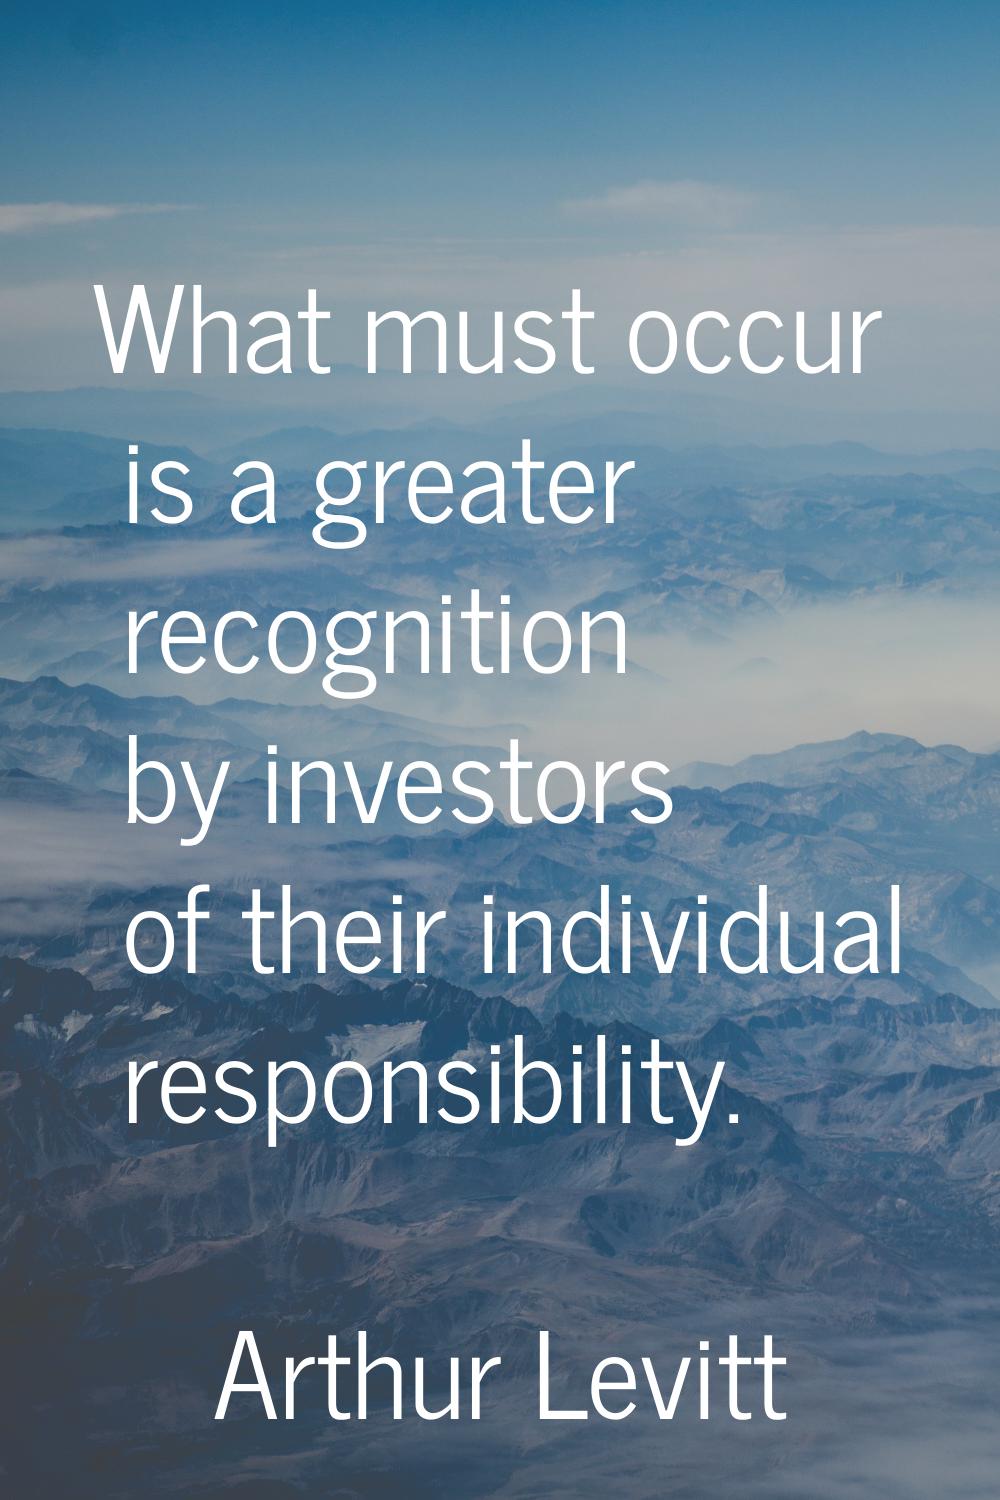 What must occur is a greater recognition by investors of their individual responsibility.